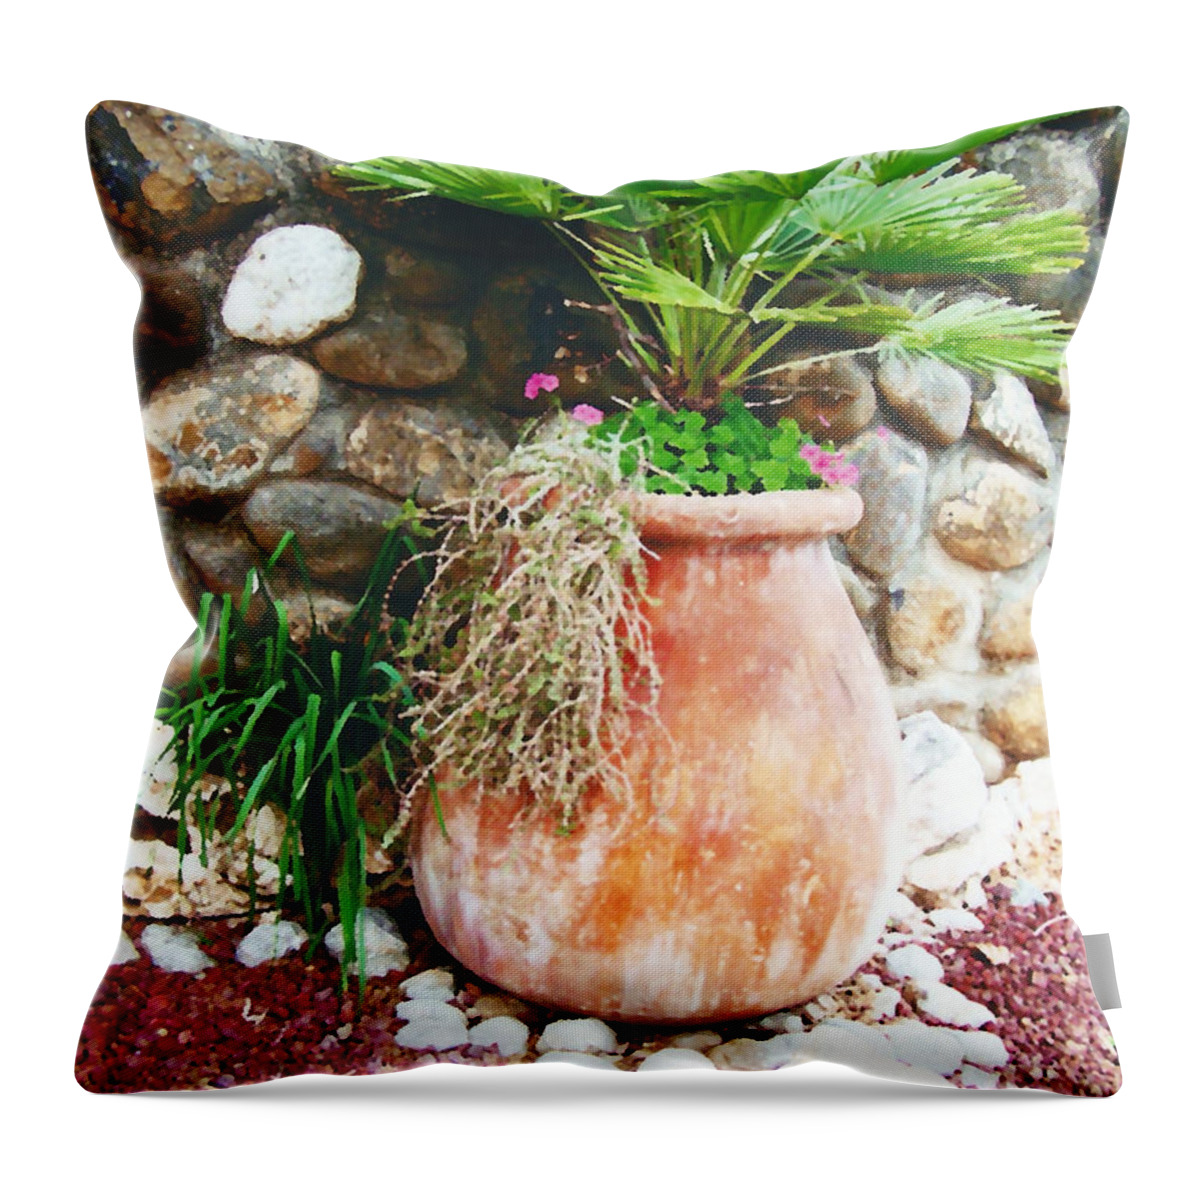 Land Of The Bible Throw Pillow featuring the photograph By The Roadside by M Three Photos